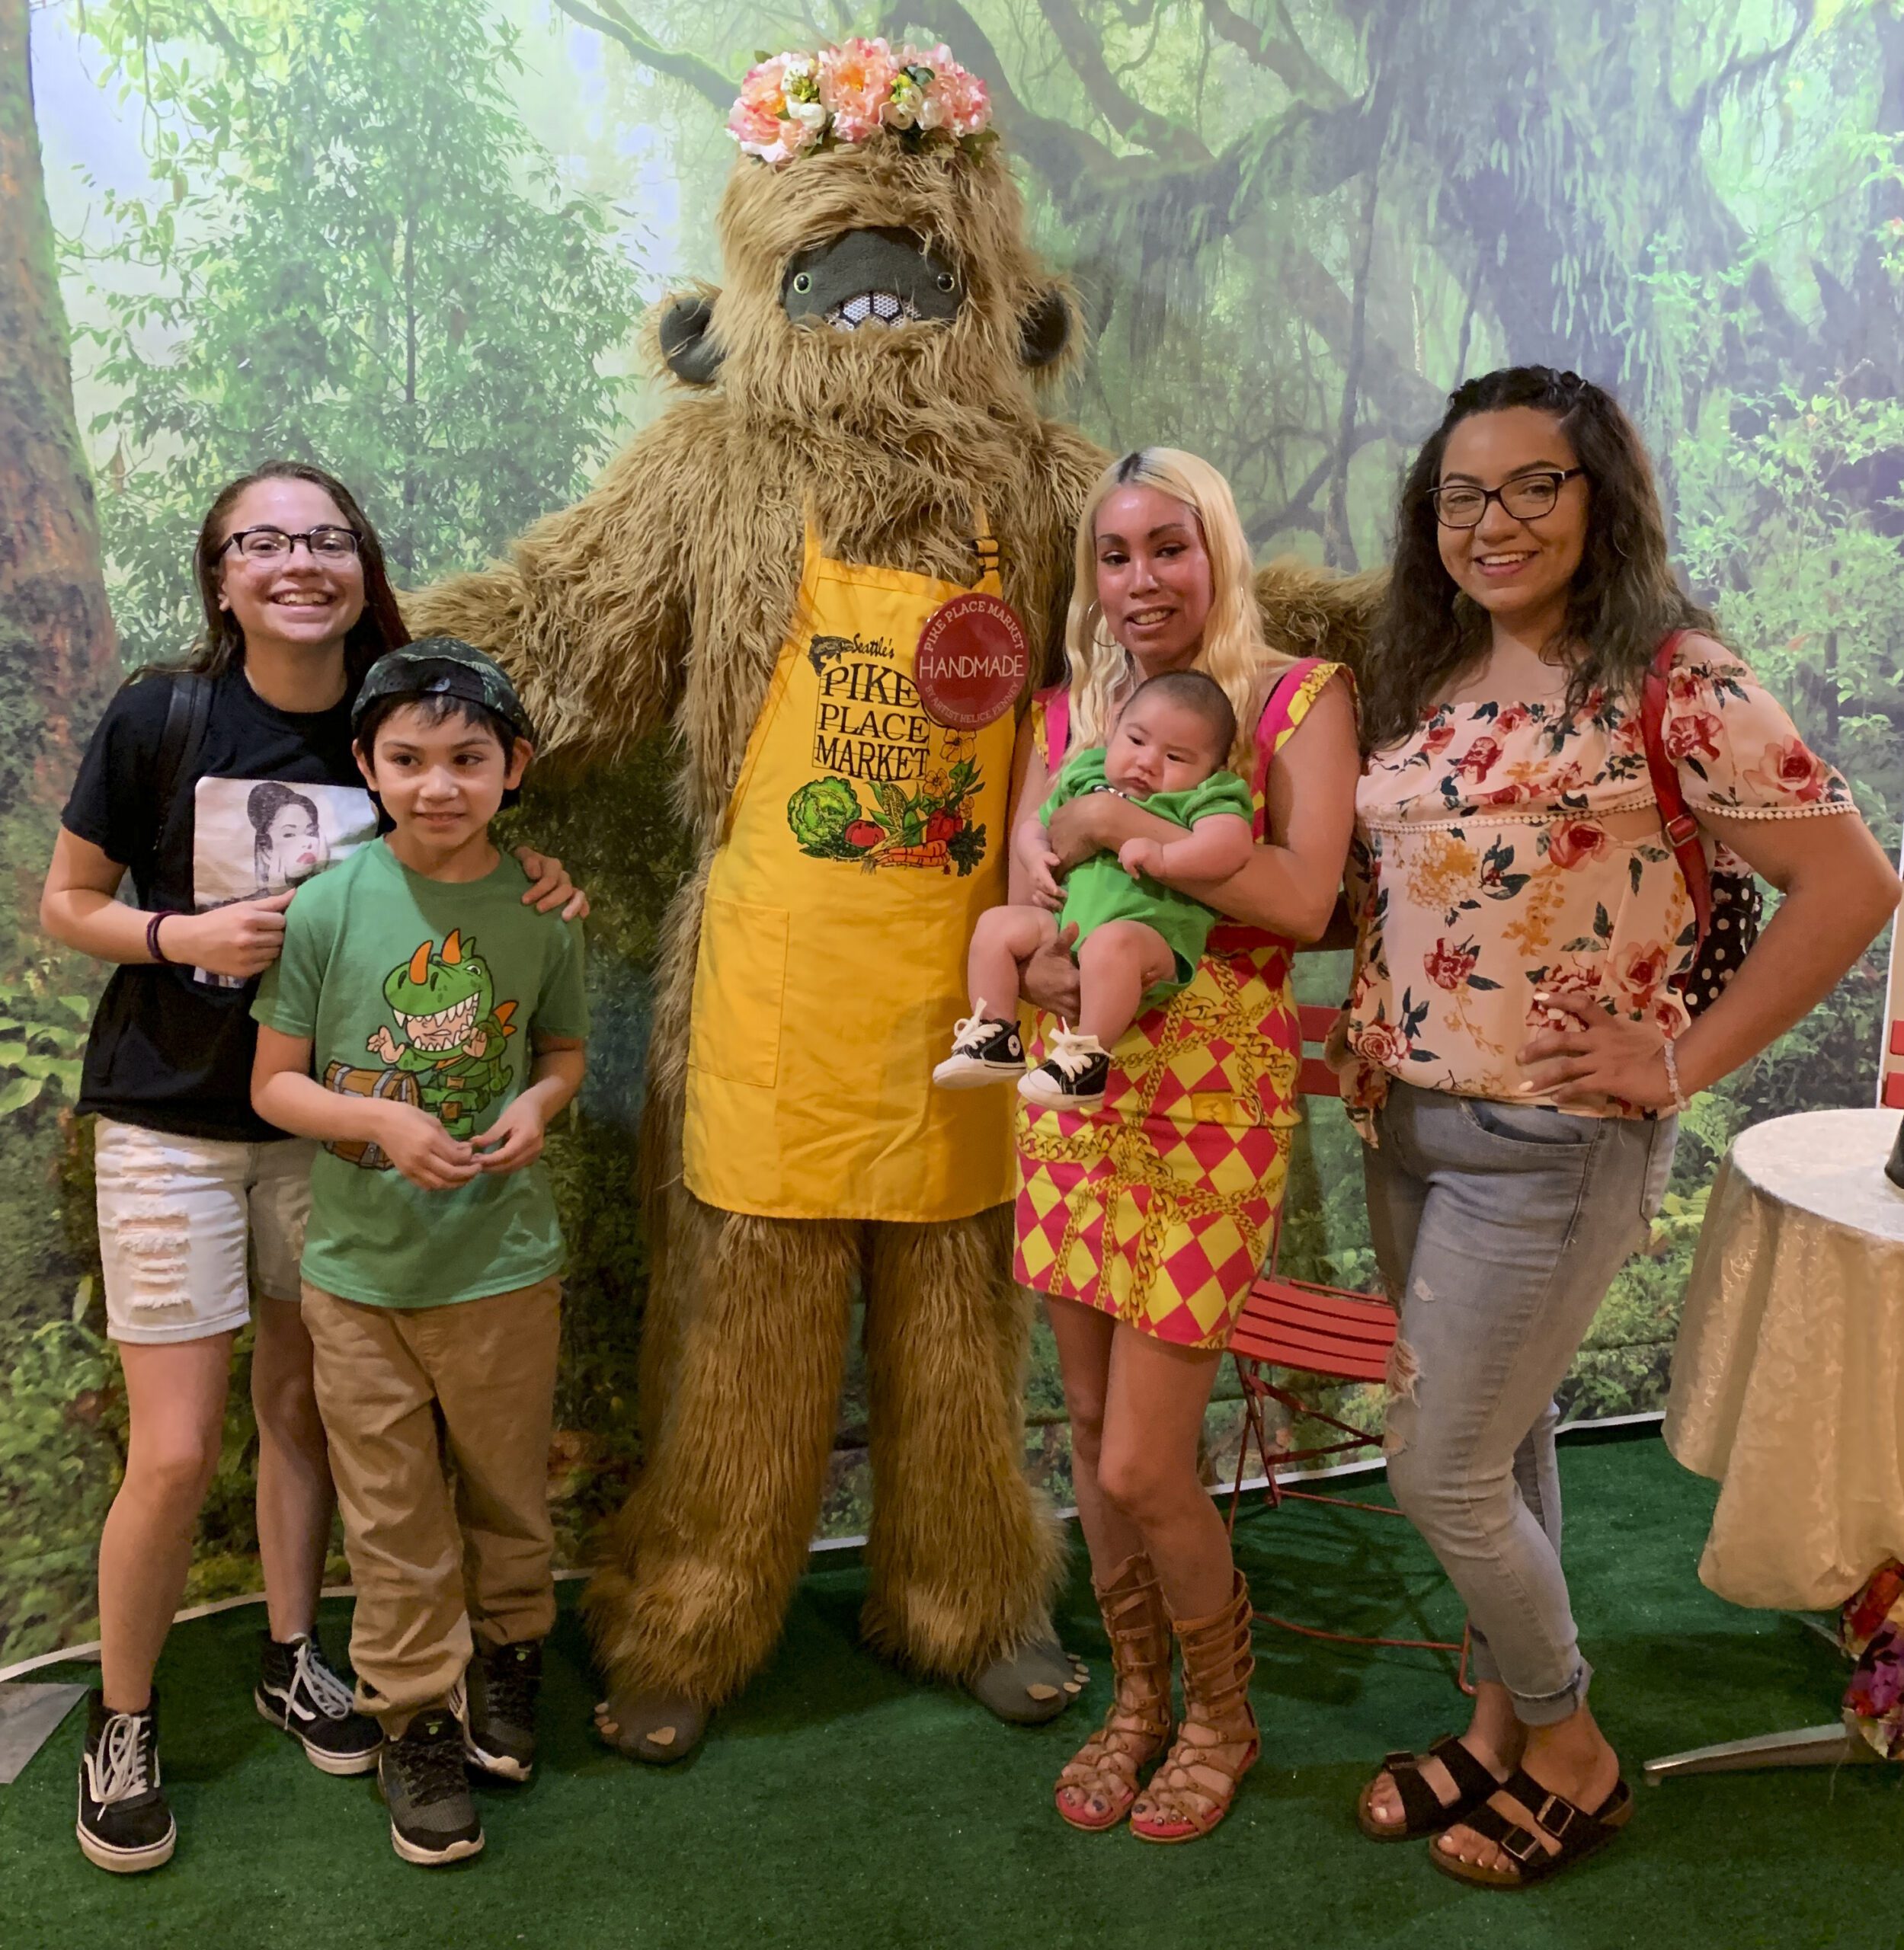 Sasquatch posing with a family at Pike Place Market's signature event Mom's Market Day